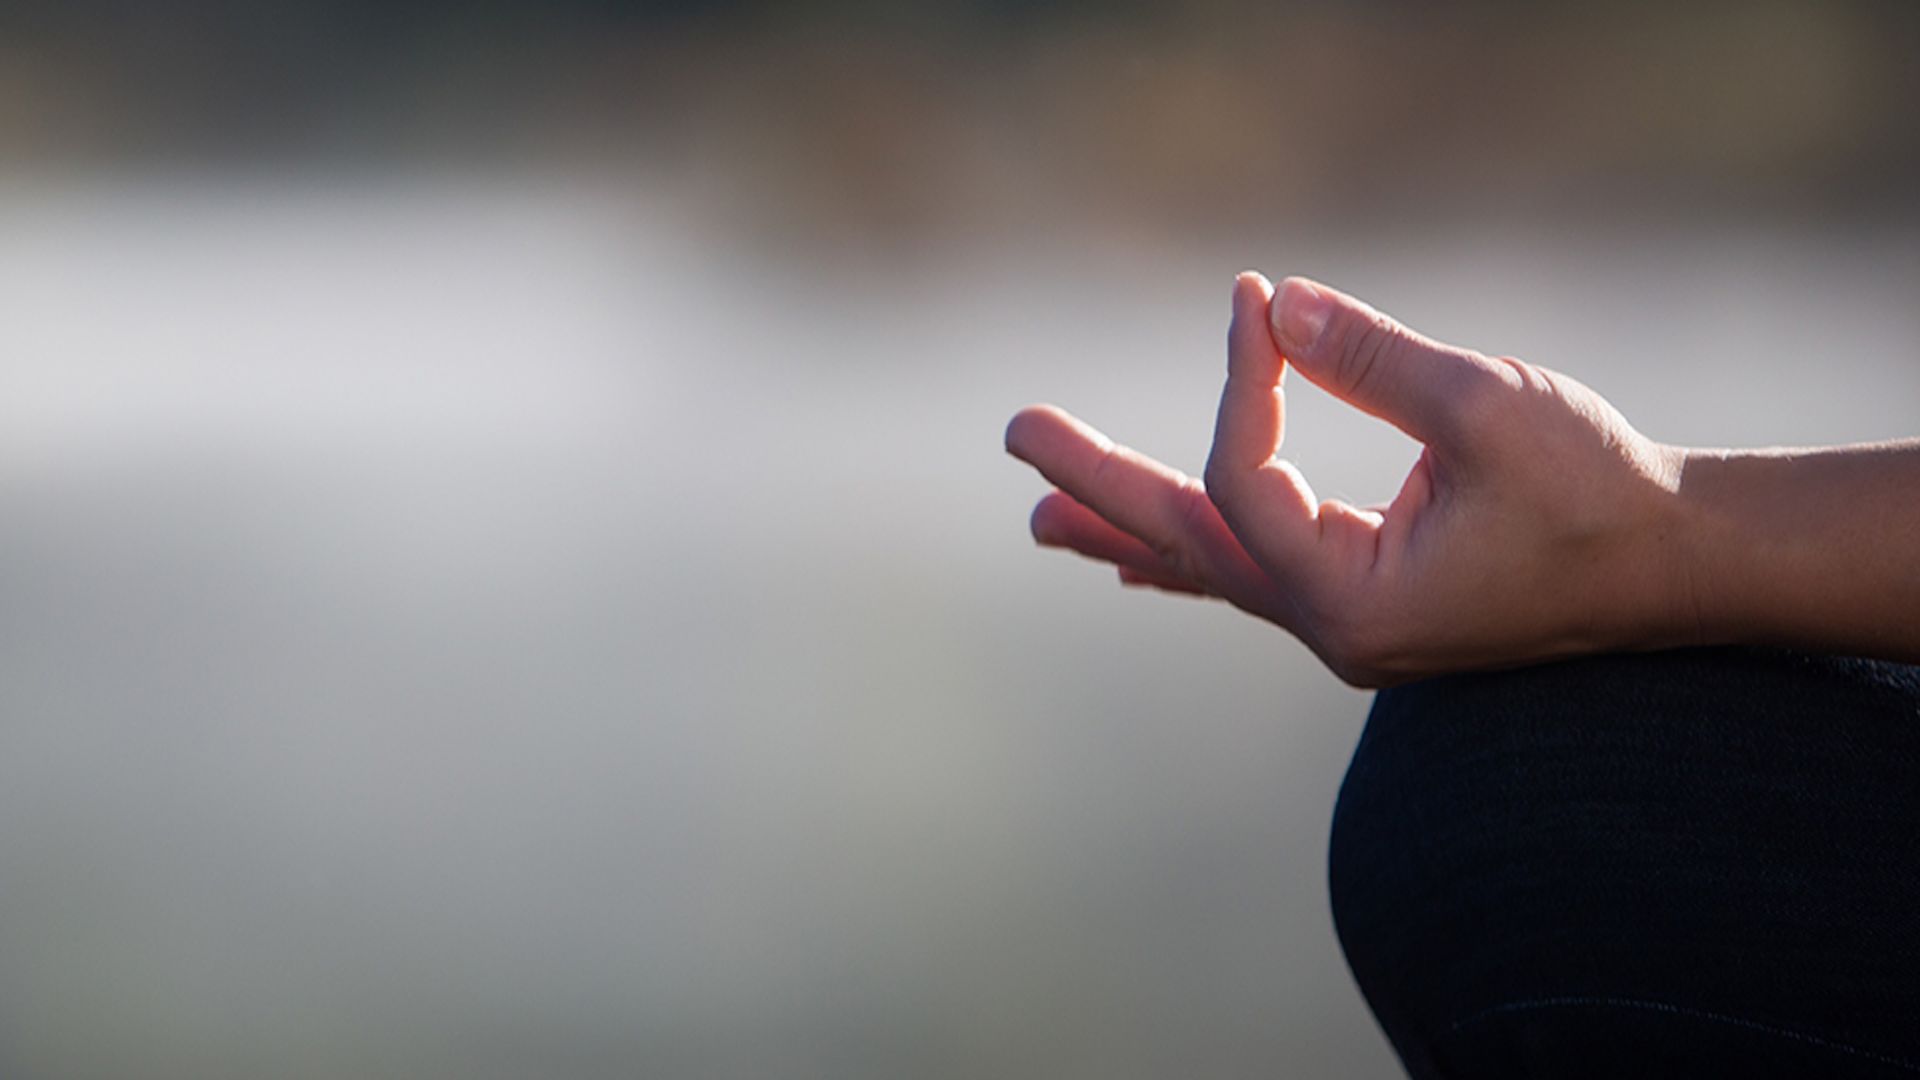 A close up of a person's hands as they are in a meditation pose